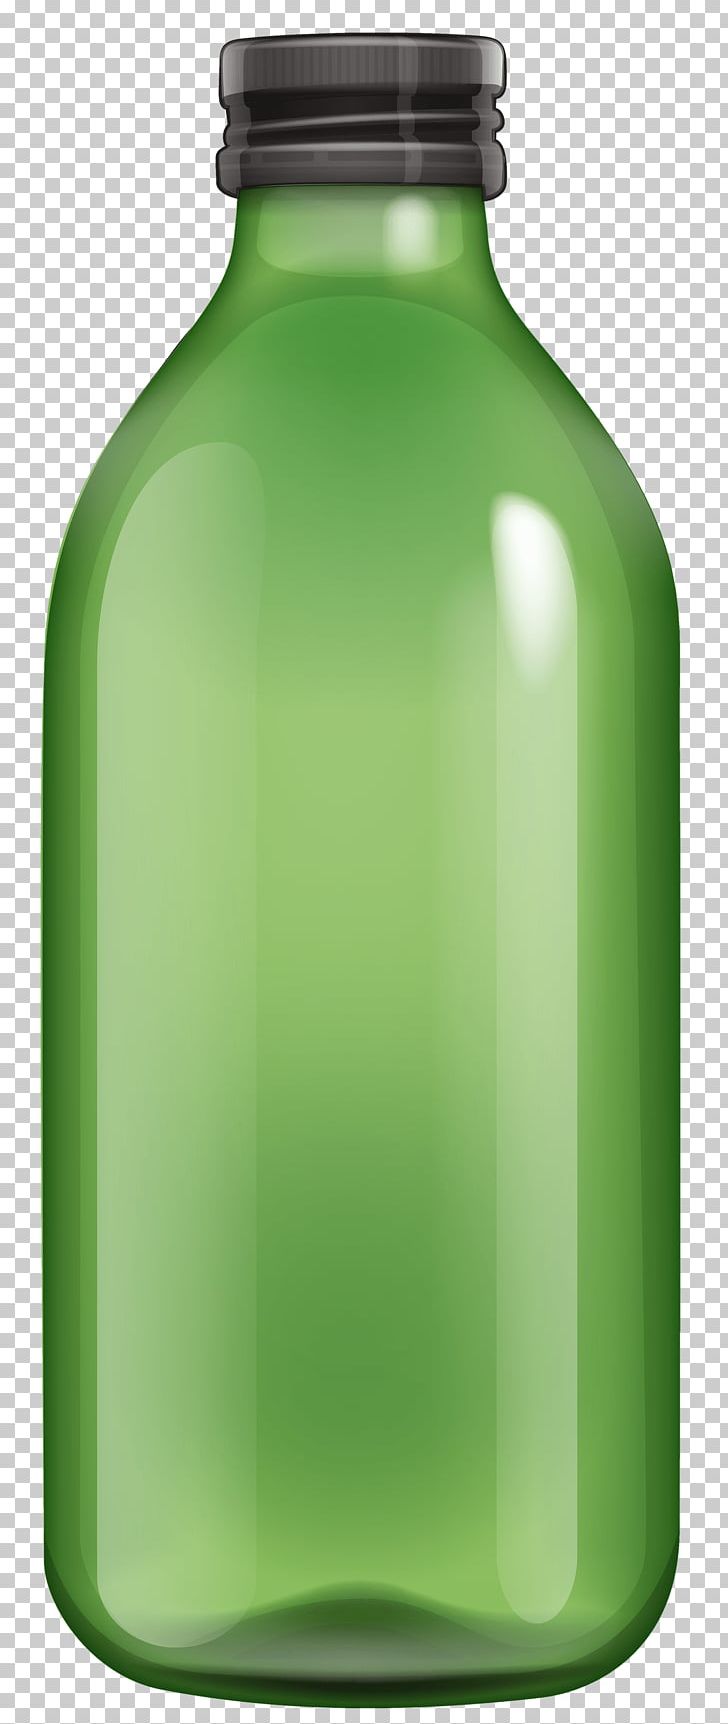 Bottle Green PNG, Clipart, Bottle, Objects Free PNG Download